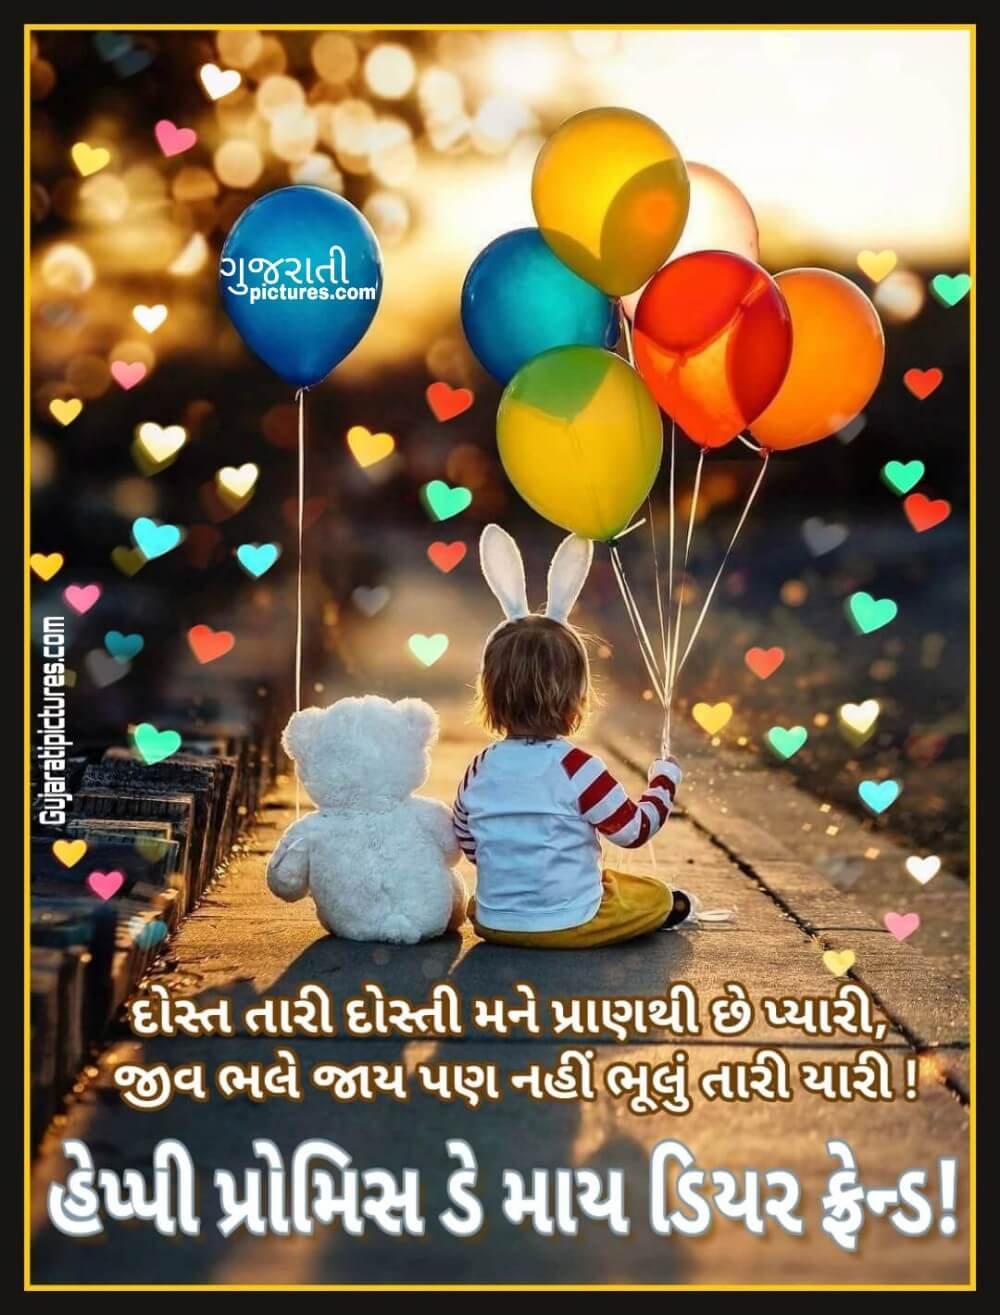 Happy Promise Day Photos - Gujarati Images – Website Dedicated to ...